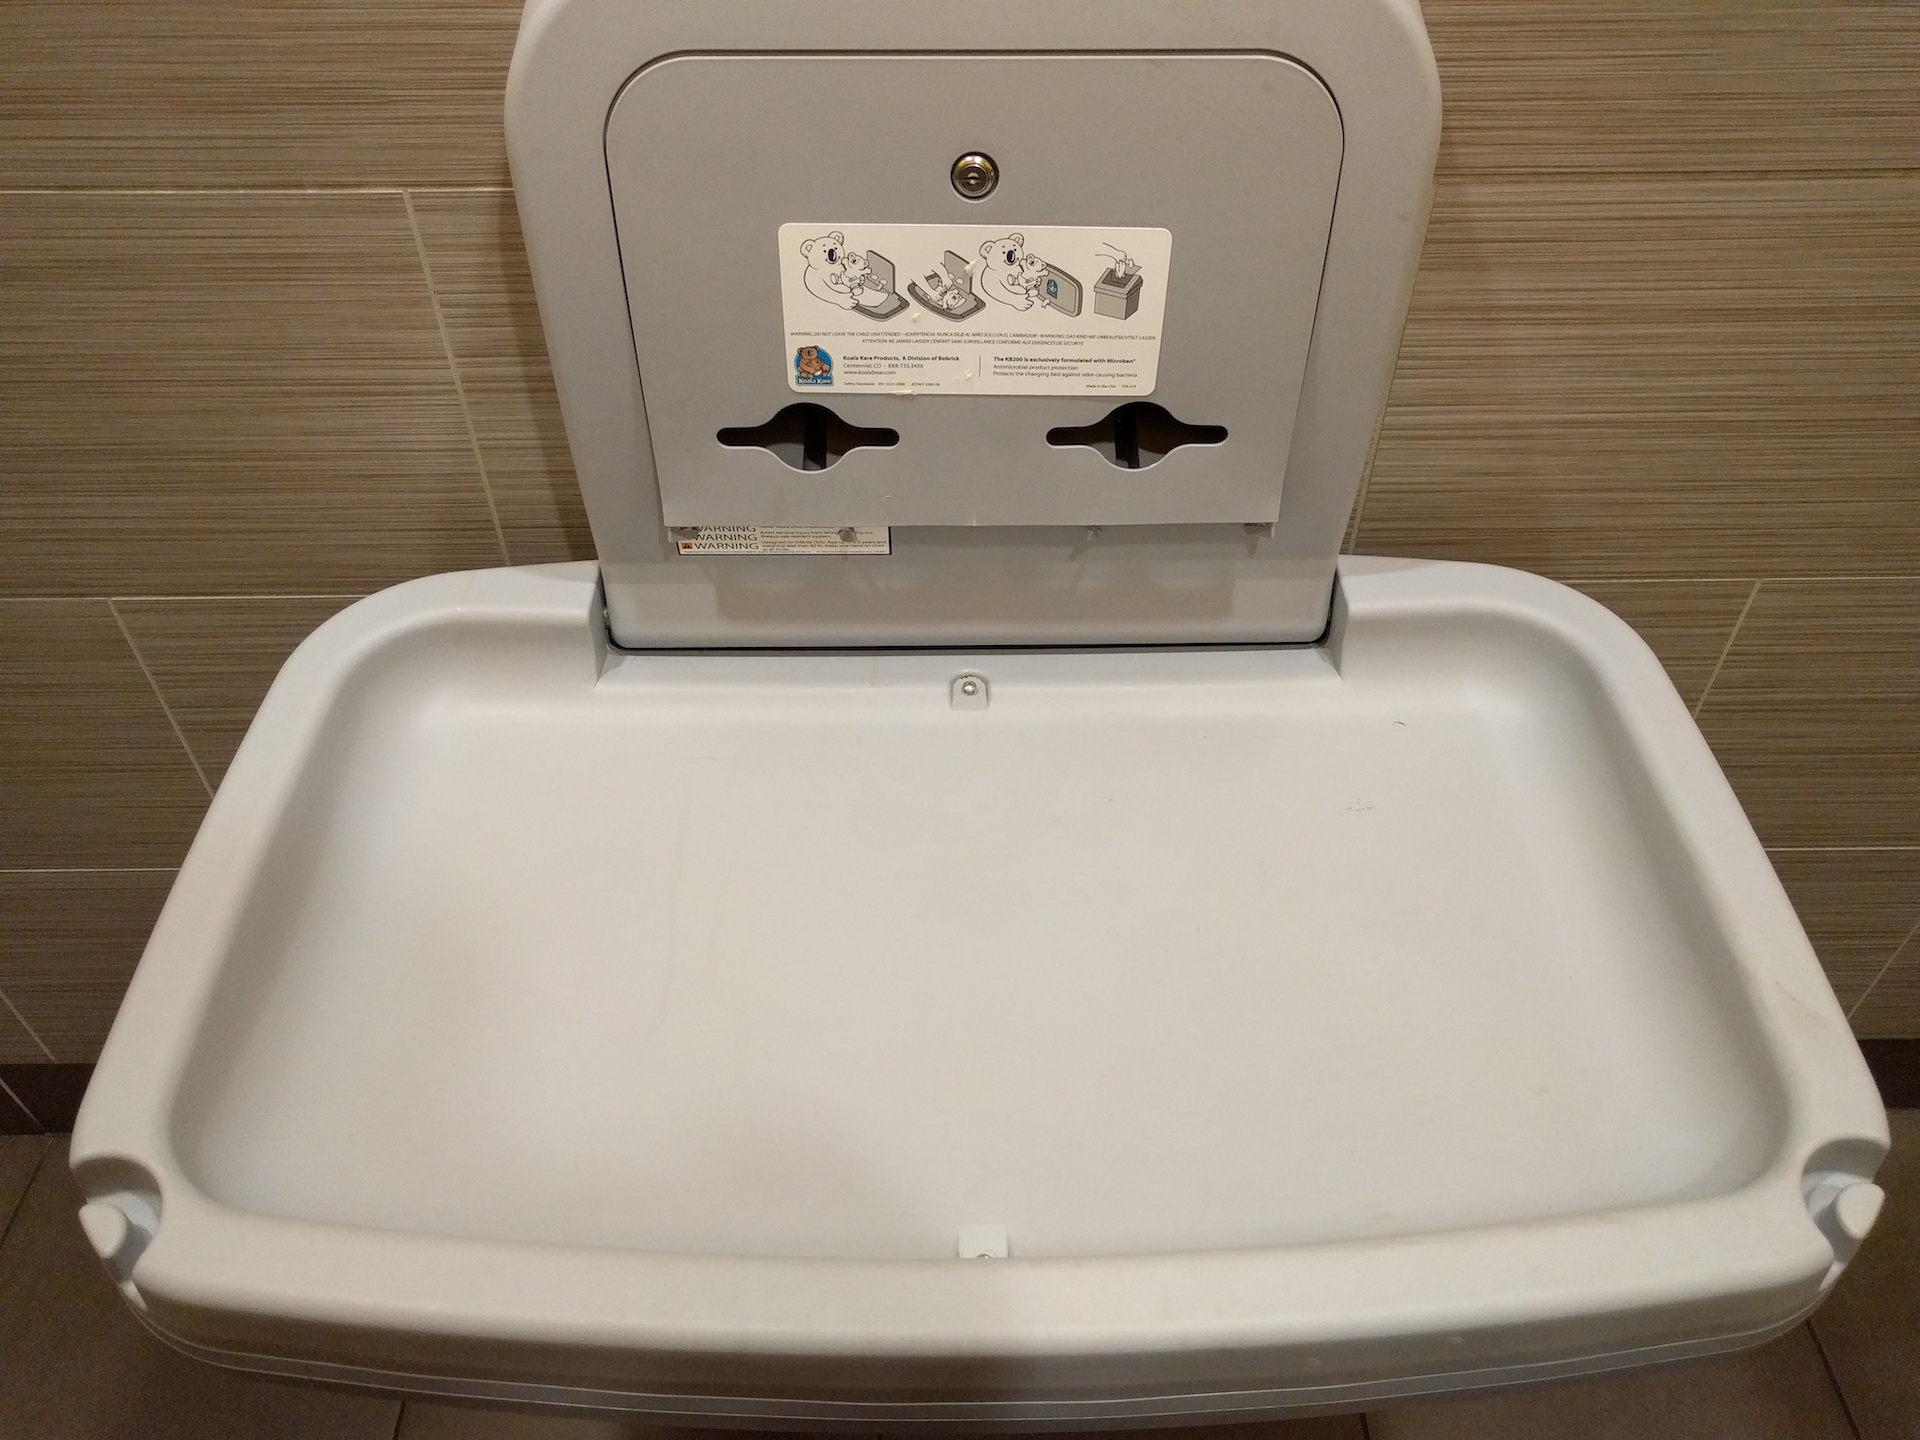 a changing table in a public restroom